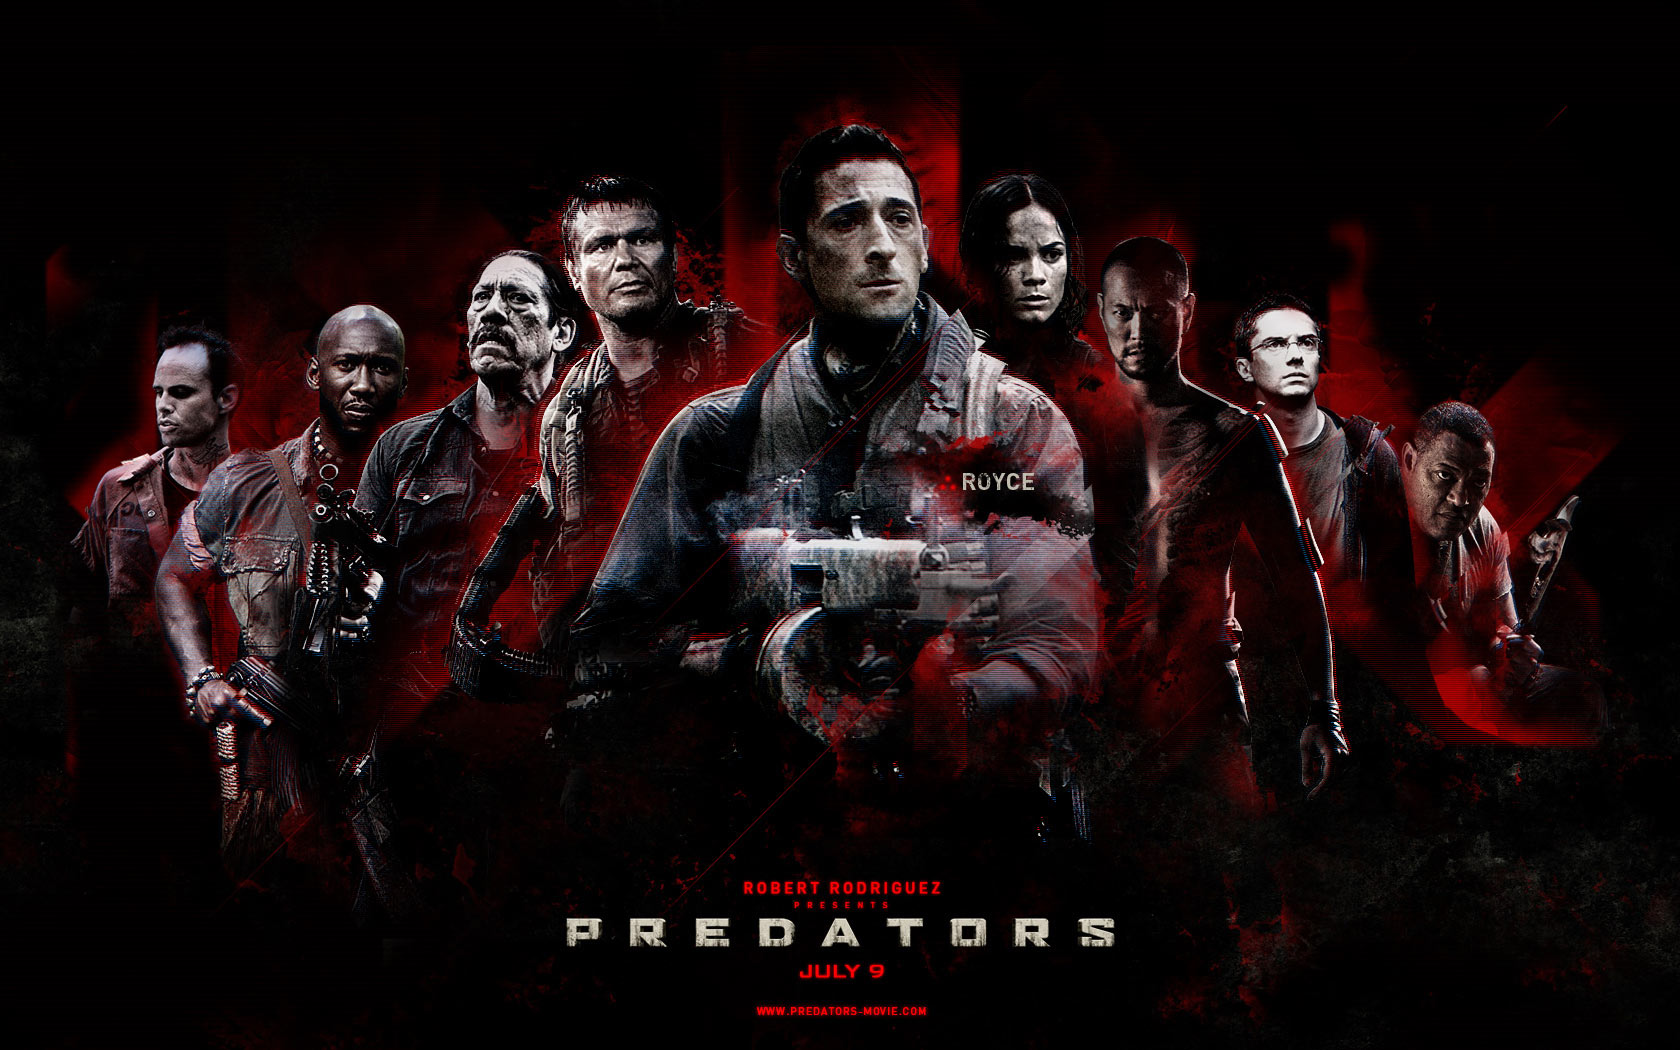 Predators (Movie) wallpapers for desktop, download free Predators (Movie)  pictures and backgrounds for PC 